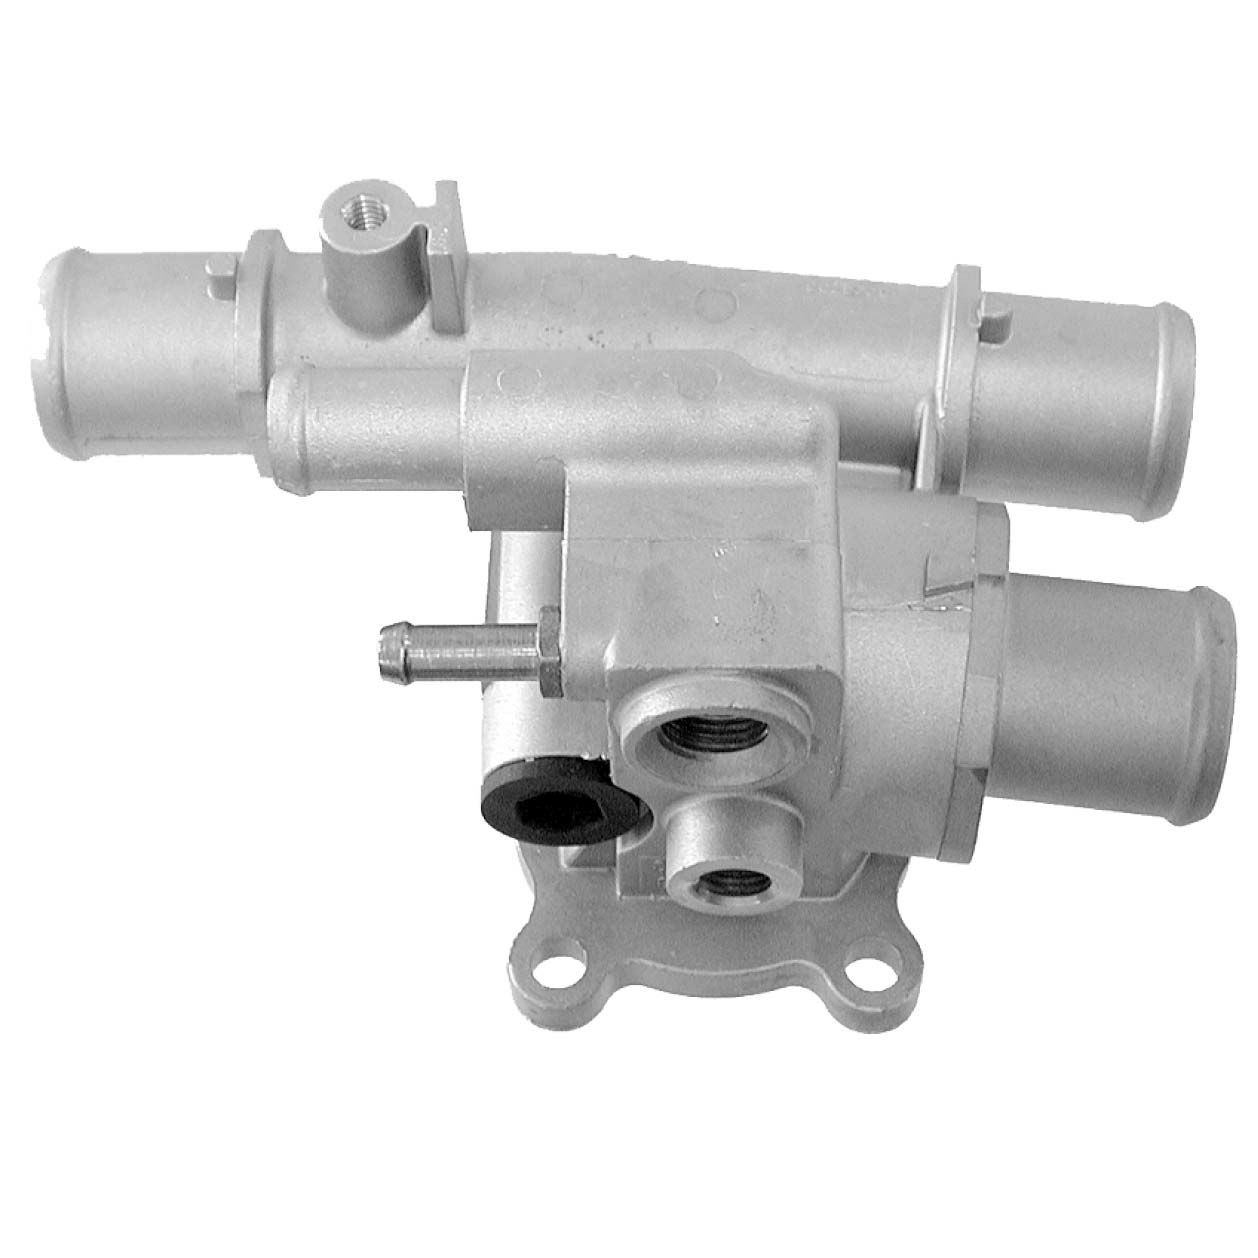 GATES TH17588G1 Engine thermostat Opening Temperature: 88°C, with gaskets/seals, with housing